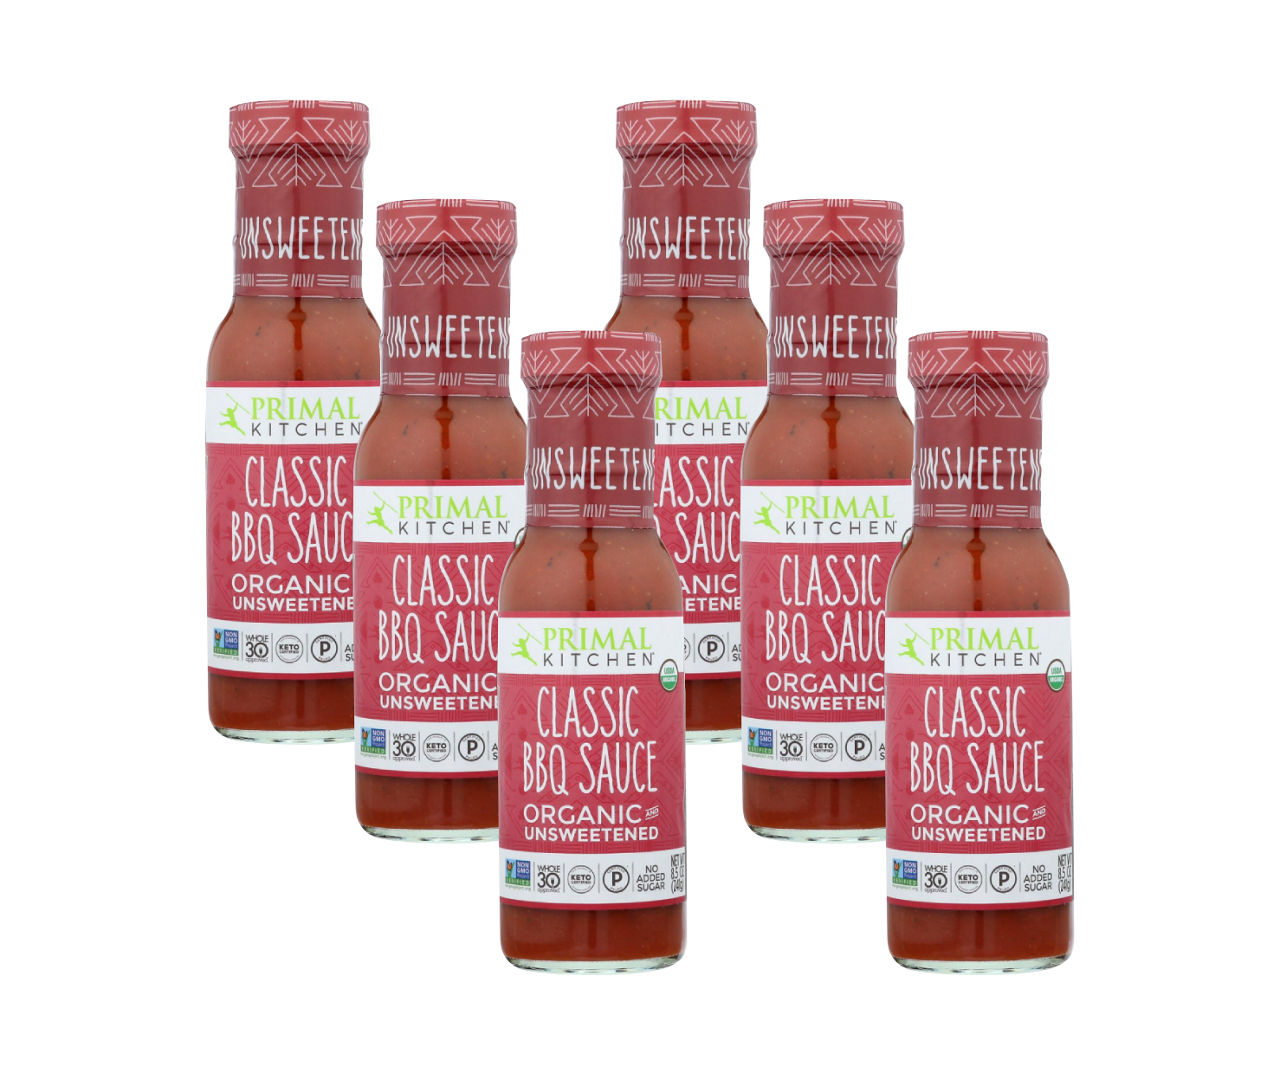 Primal Kitchen Organic & Unsweetened Classic BBQ Sauce, Pack of 6